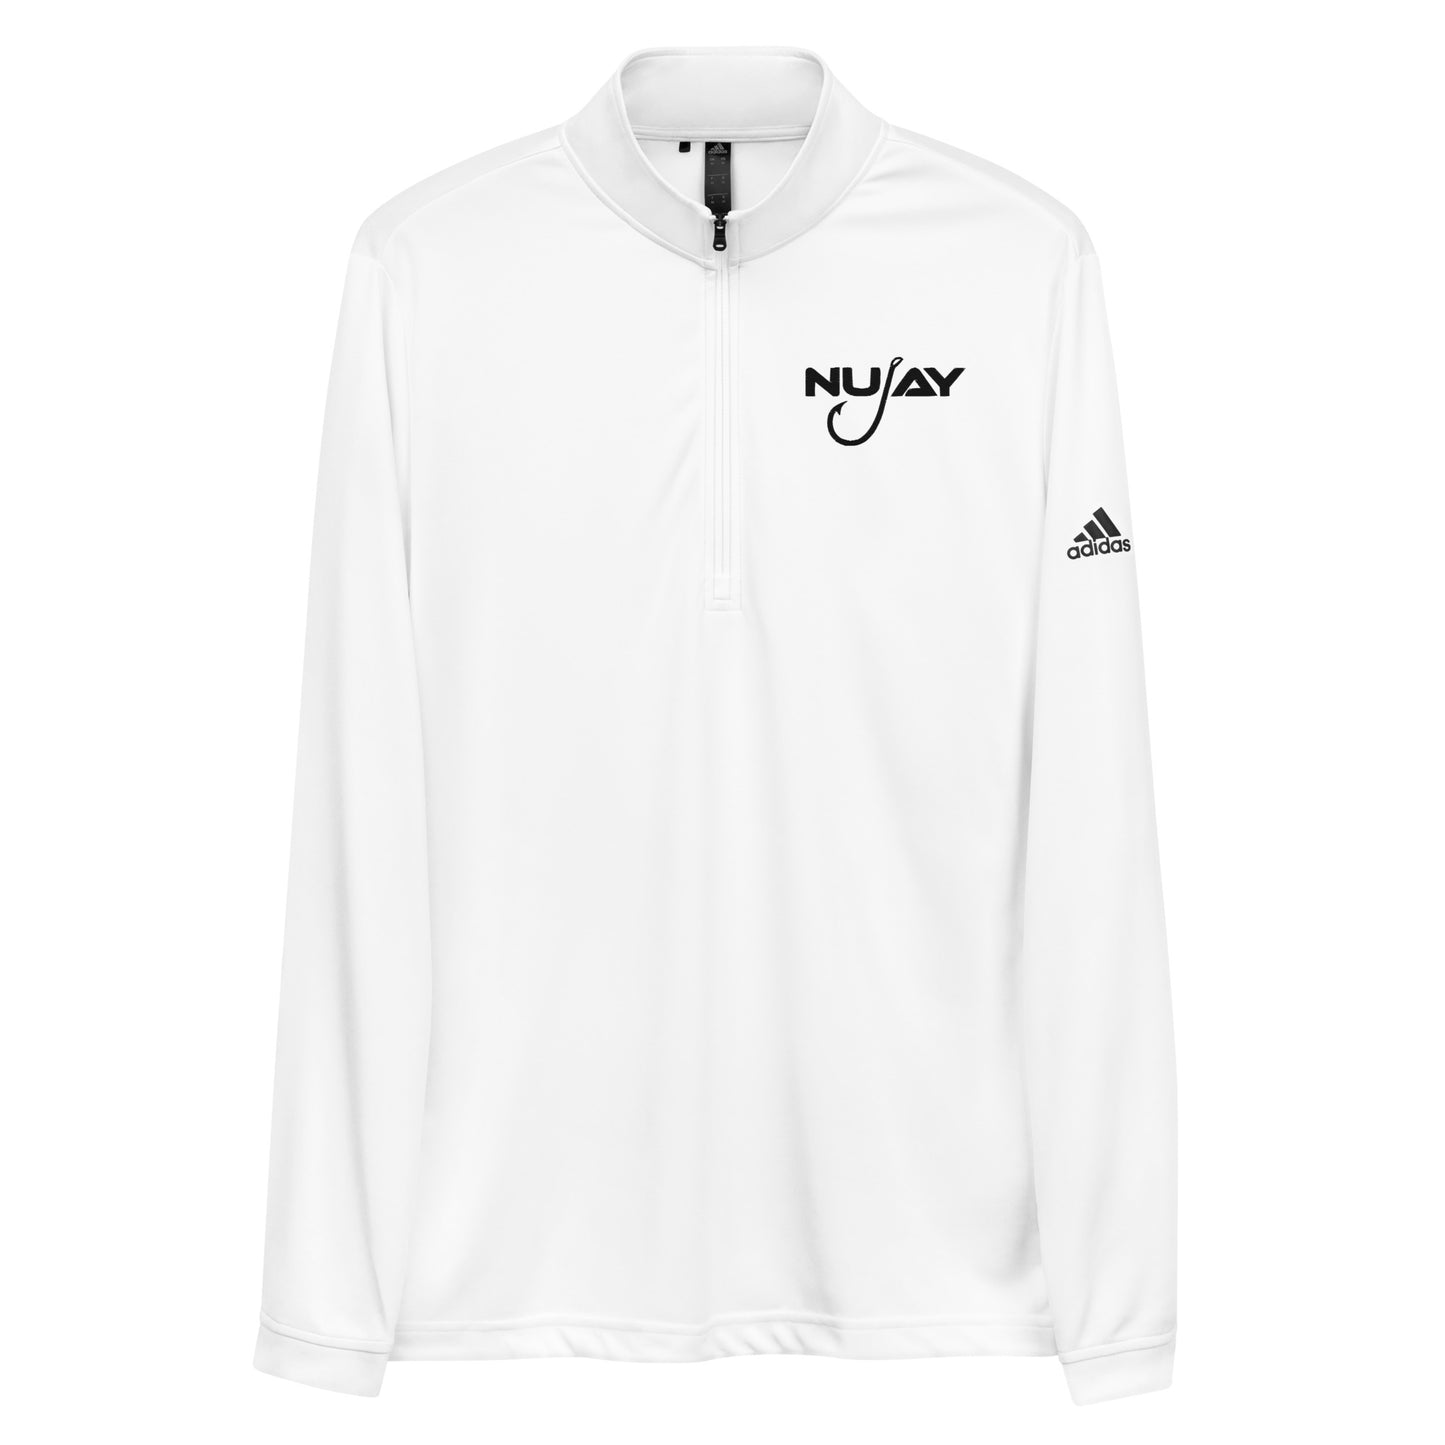 Nujay Outdoors Adidas Quarter zip pullover